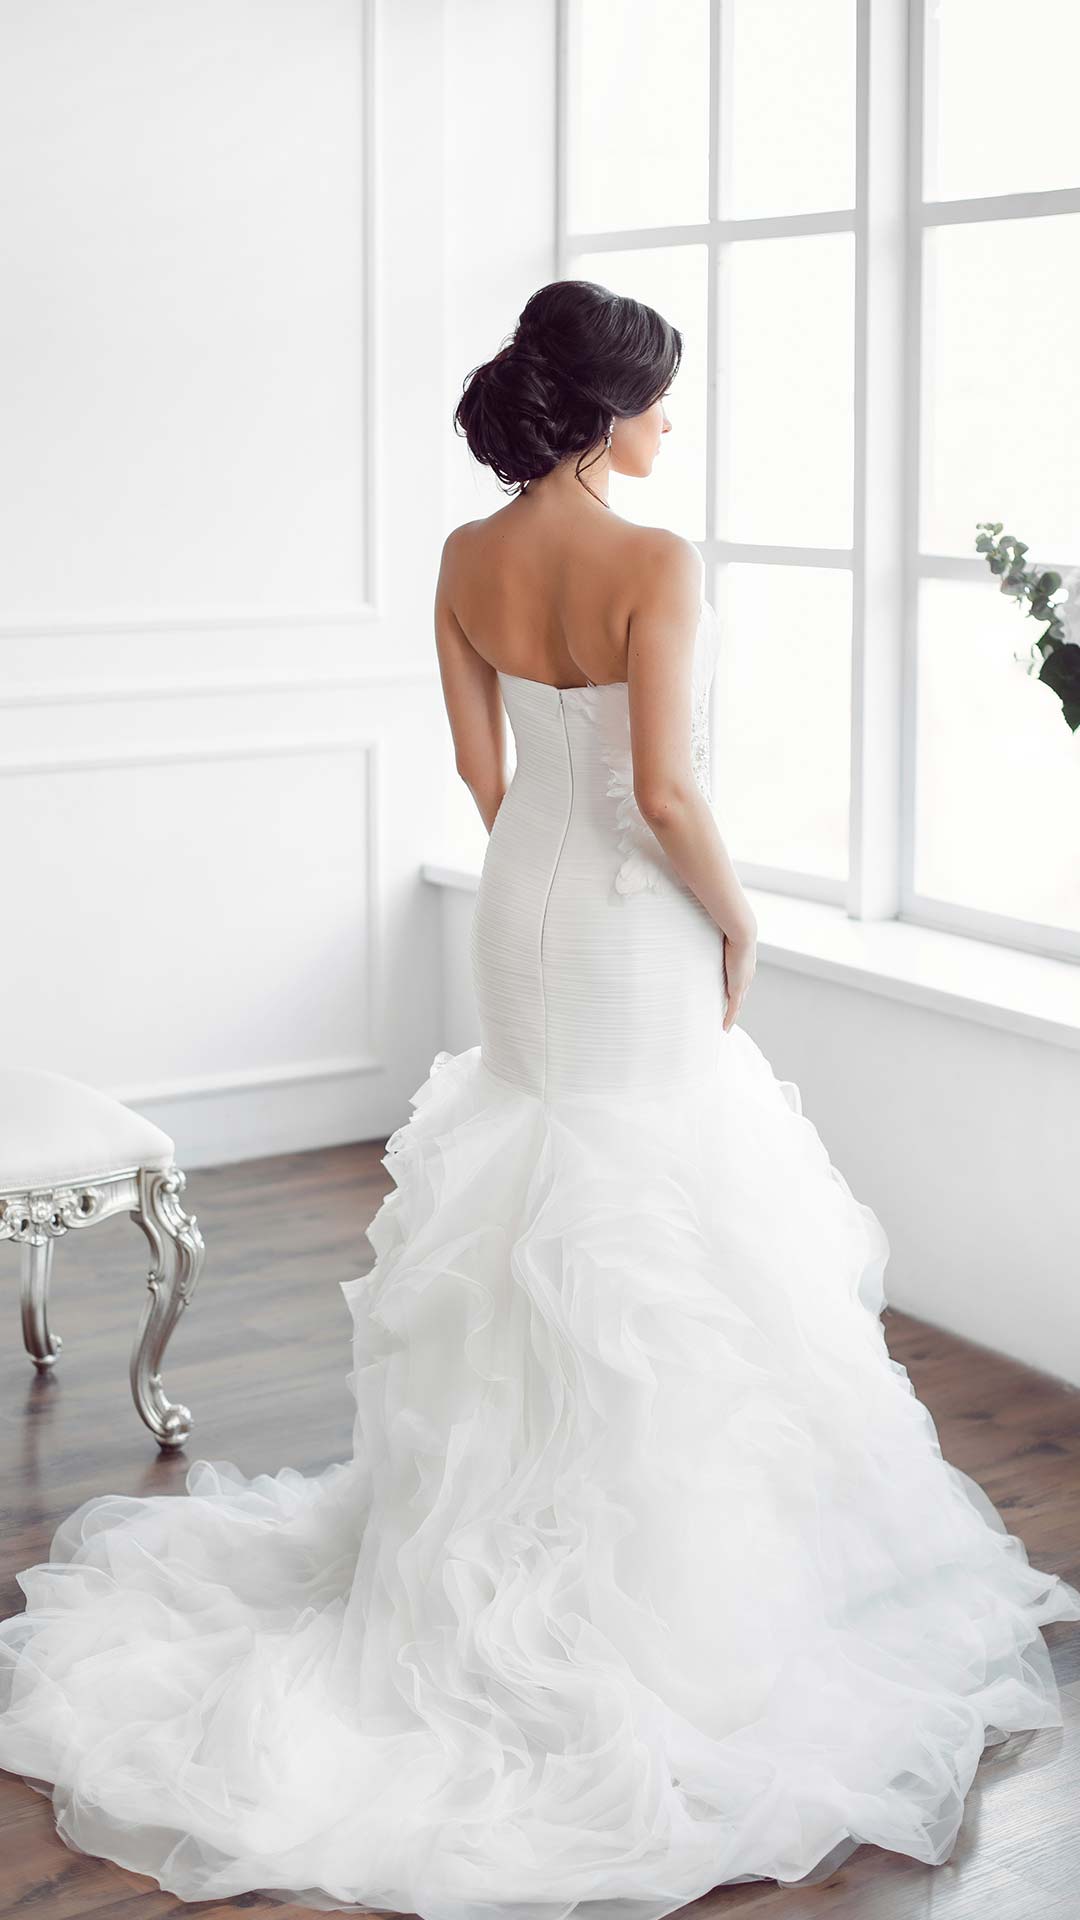 gown and bridal care service featured image